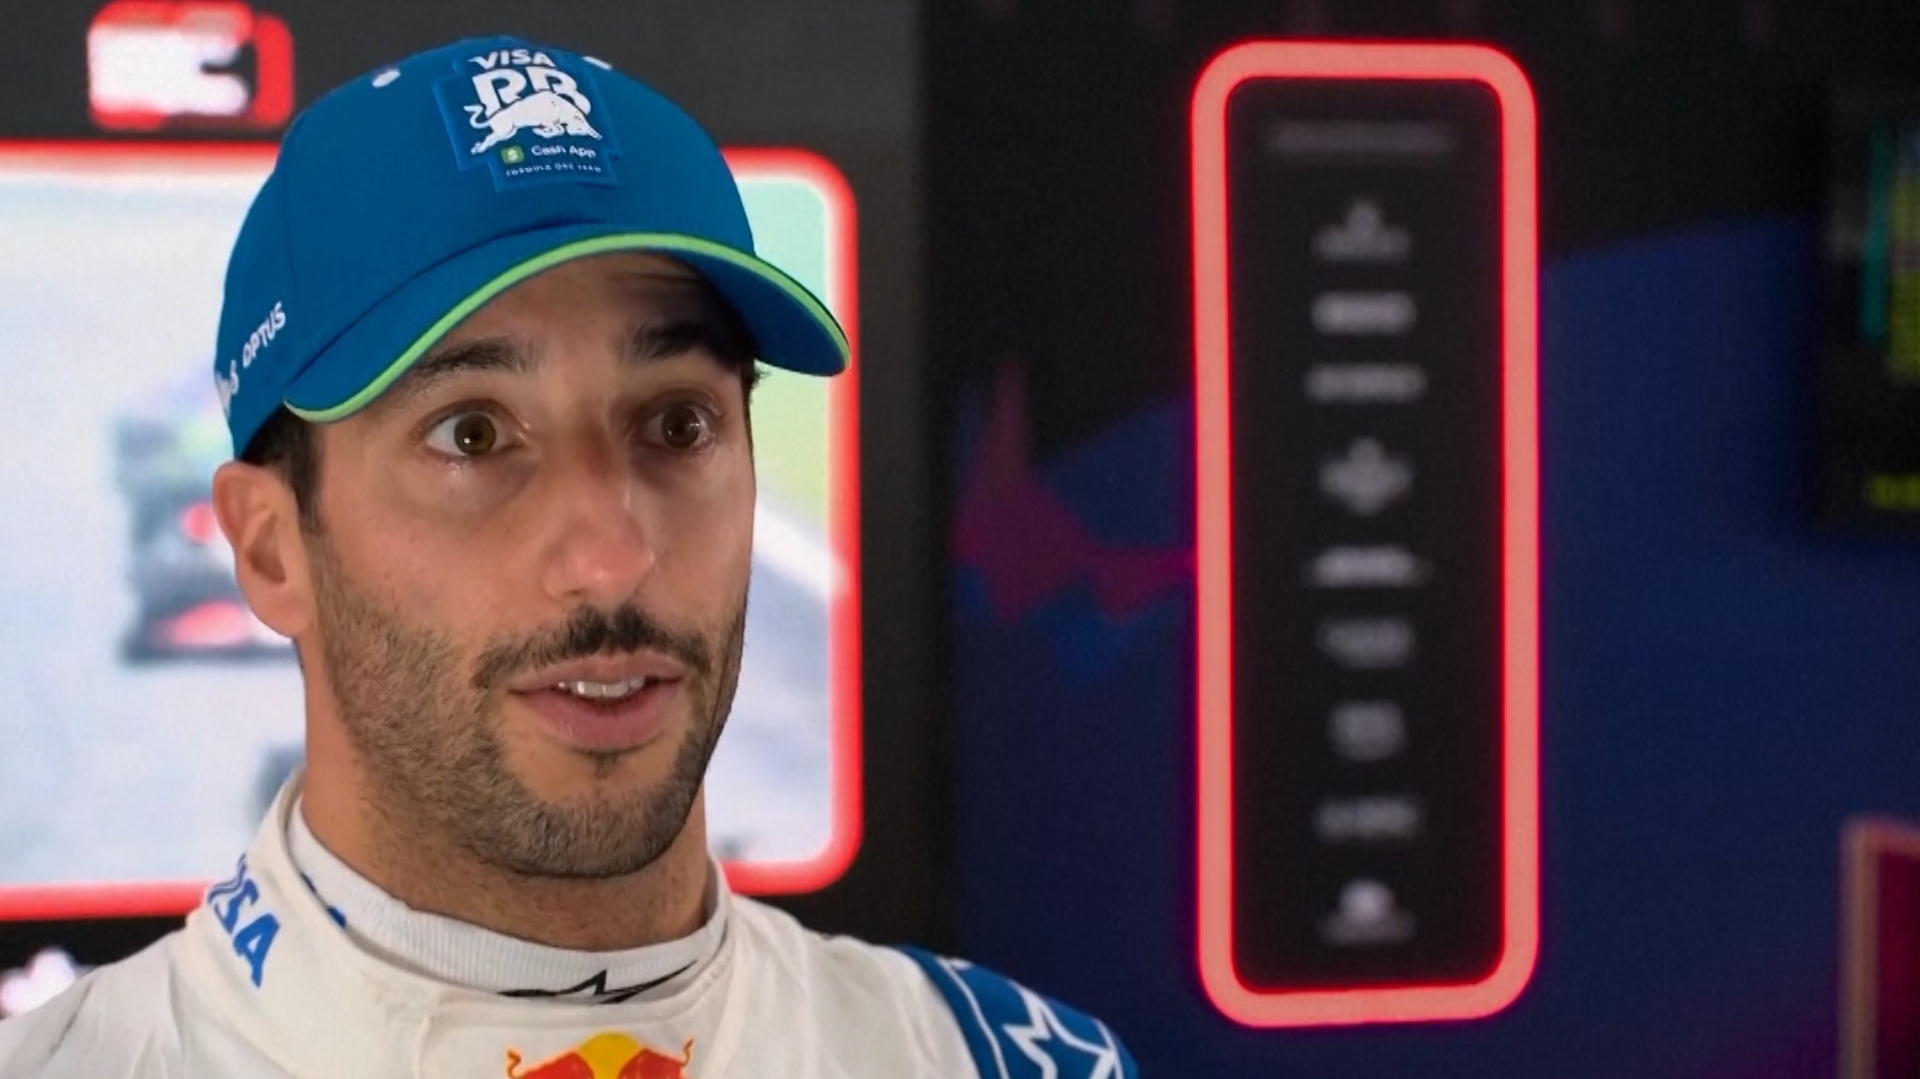 Ricciardo: It's frustrating when your race is ruined by someone else